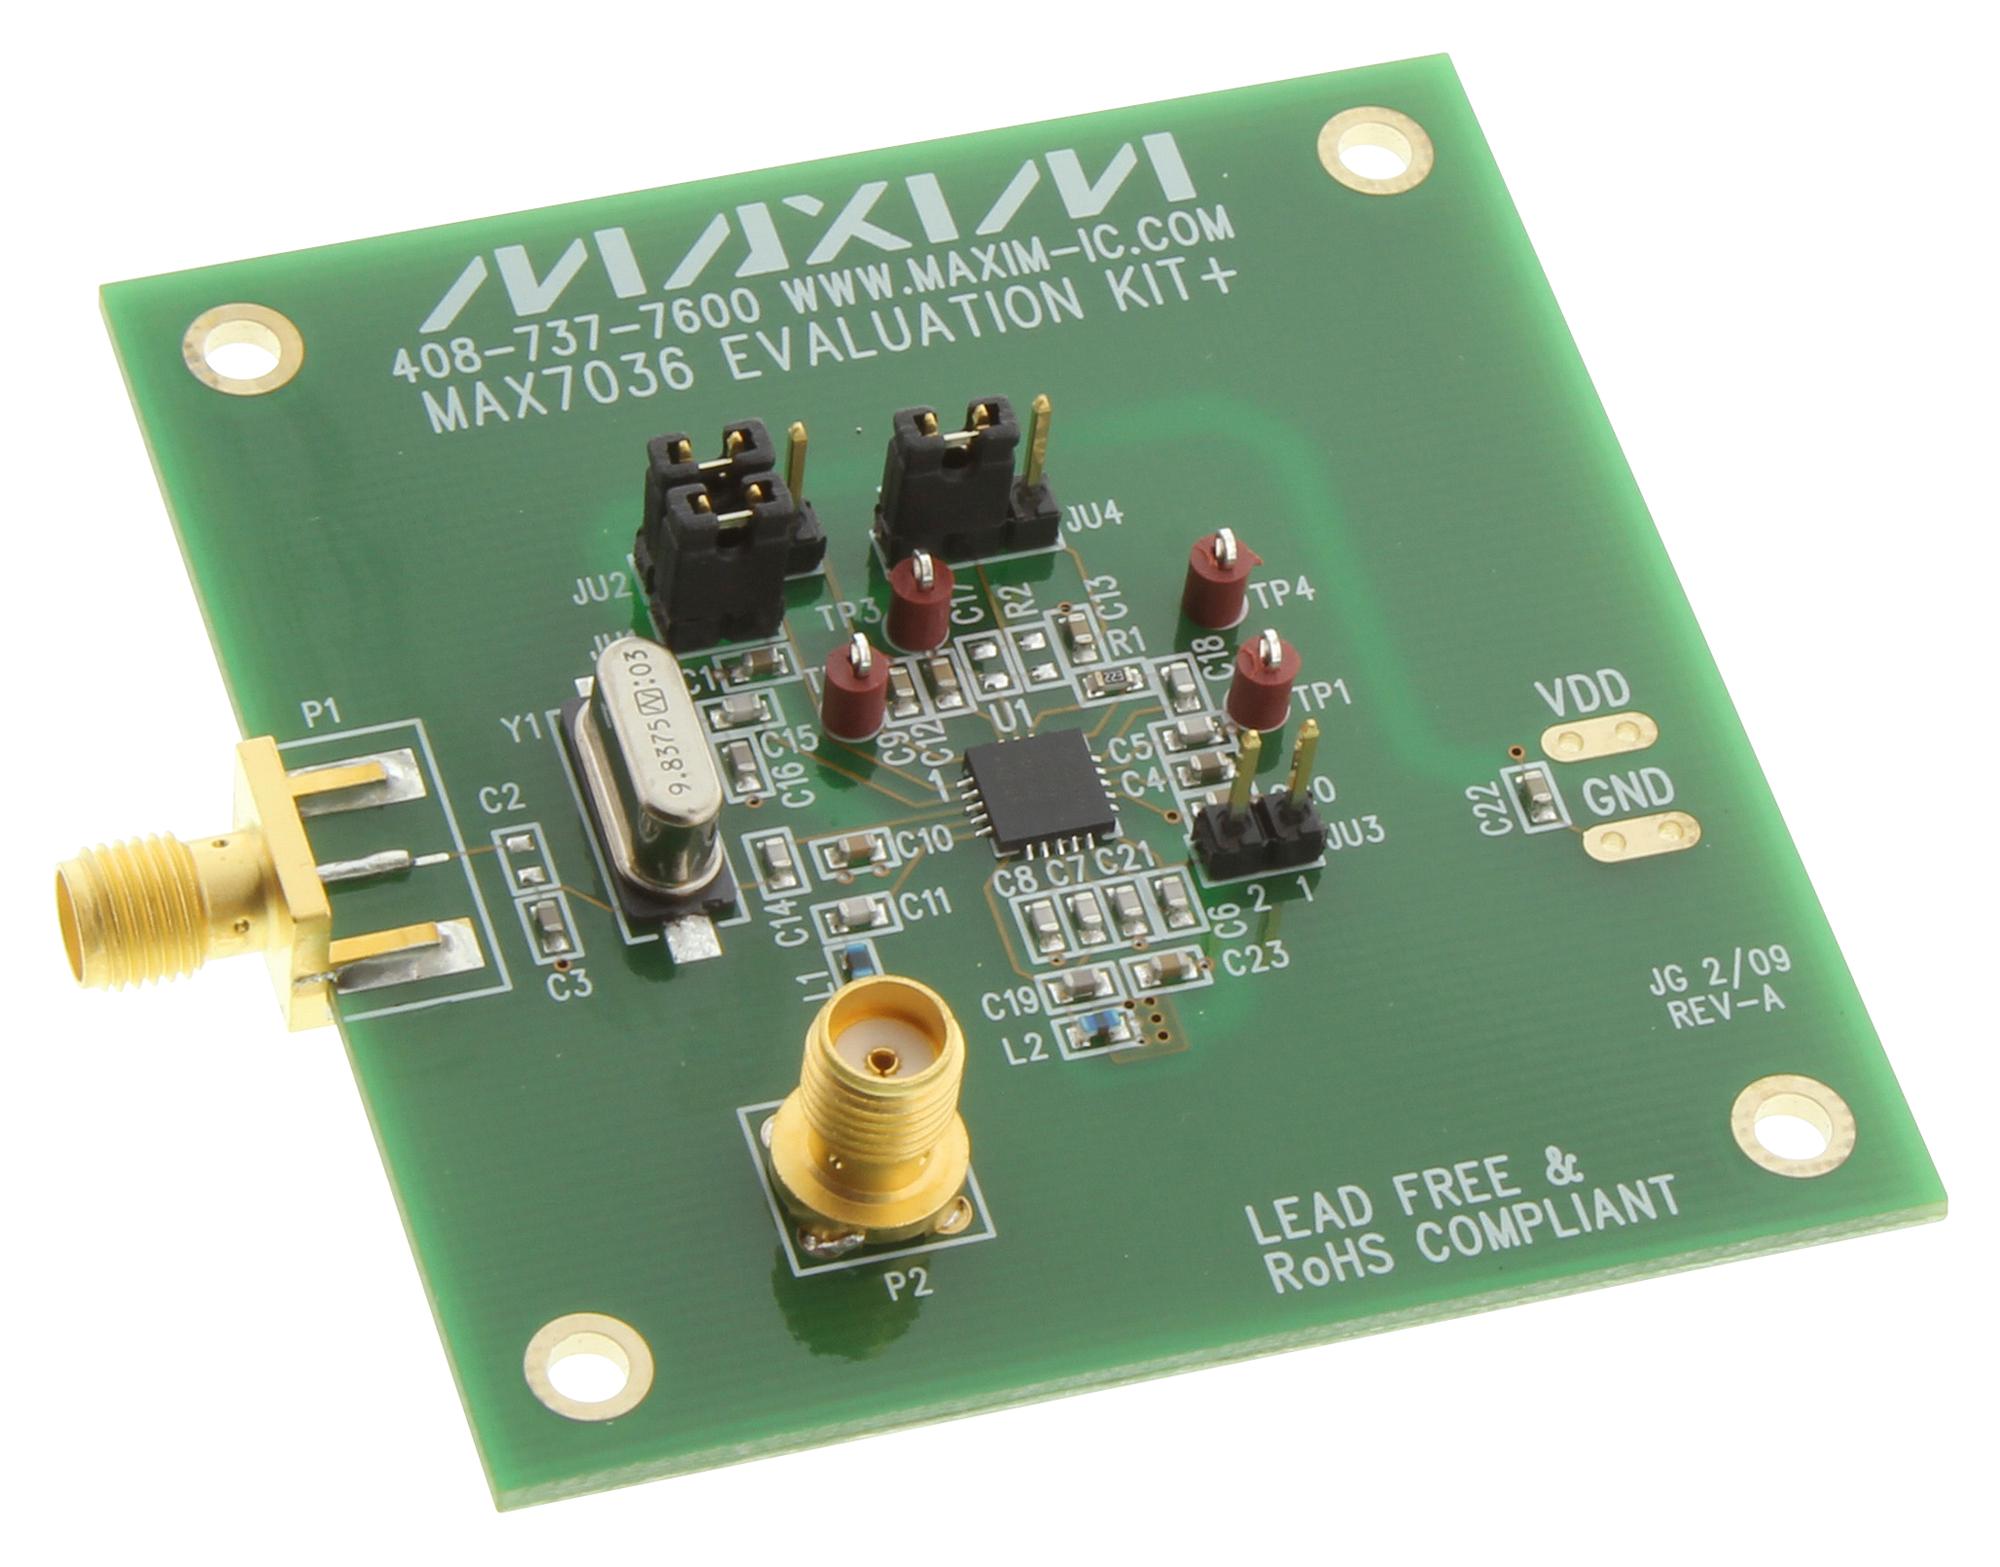 MAX7036EVKIT-315+ EVAL BOARD, 315MHZ ASK RECEIVER MAXIM INTEGRATED / ANALOG DEVICES